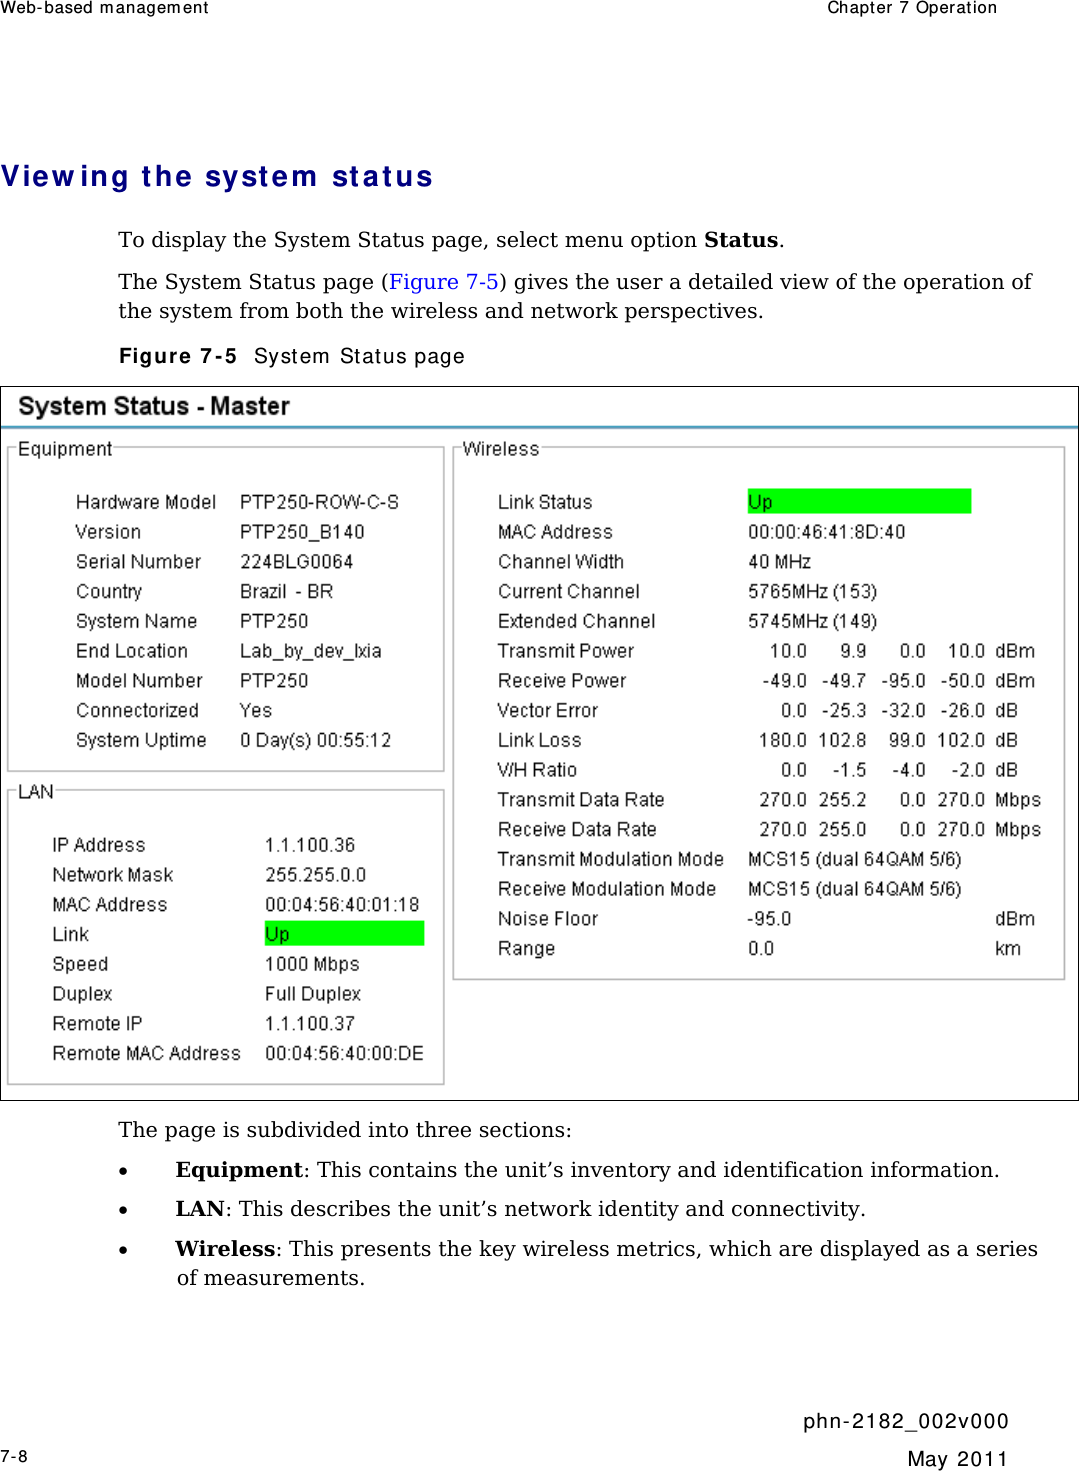 Web- based m anagem ent   Chapt er  7 Operat ion     phn- 2 182_002v 000 7-8  May 2011  View ing t he syst e m  sta t us  To display the System Status page, select menu option Status. The System Status page (Figure 7-5) gives the user a detailed view of the operation of the system from both the wireless and network perspectives.  Figure 7 - 5   Syst em  St atus page  The page is subdivided into three sections: • Equipment: This contains the unit’s inventory and identification information. • LAN: This describes the unit’s network identity and connectivity.  • Wireless: This presents the key wireless metrics, which are displayed as a series of measurements. 